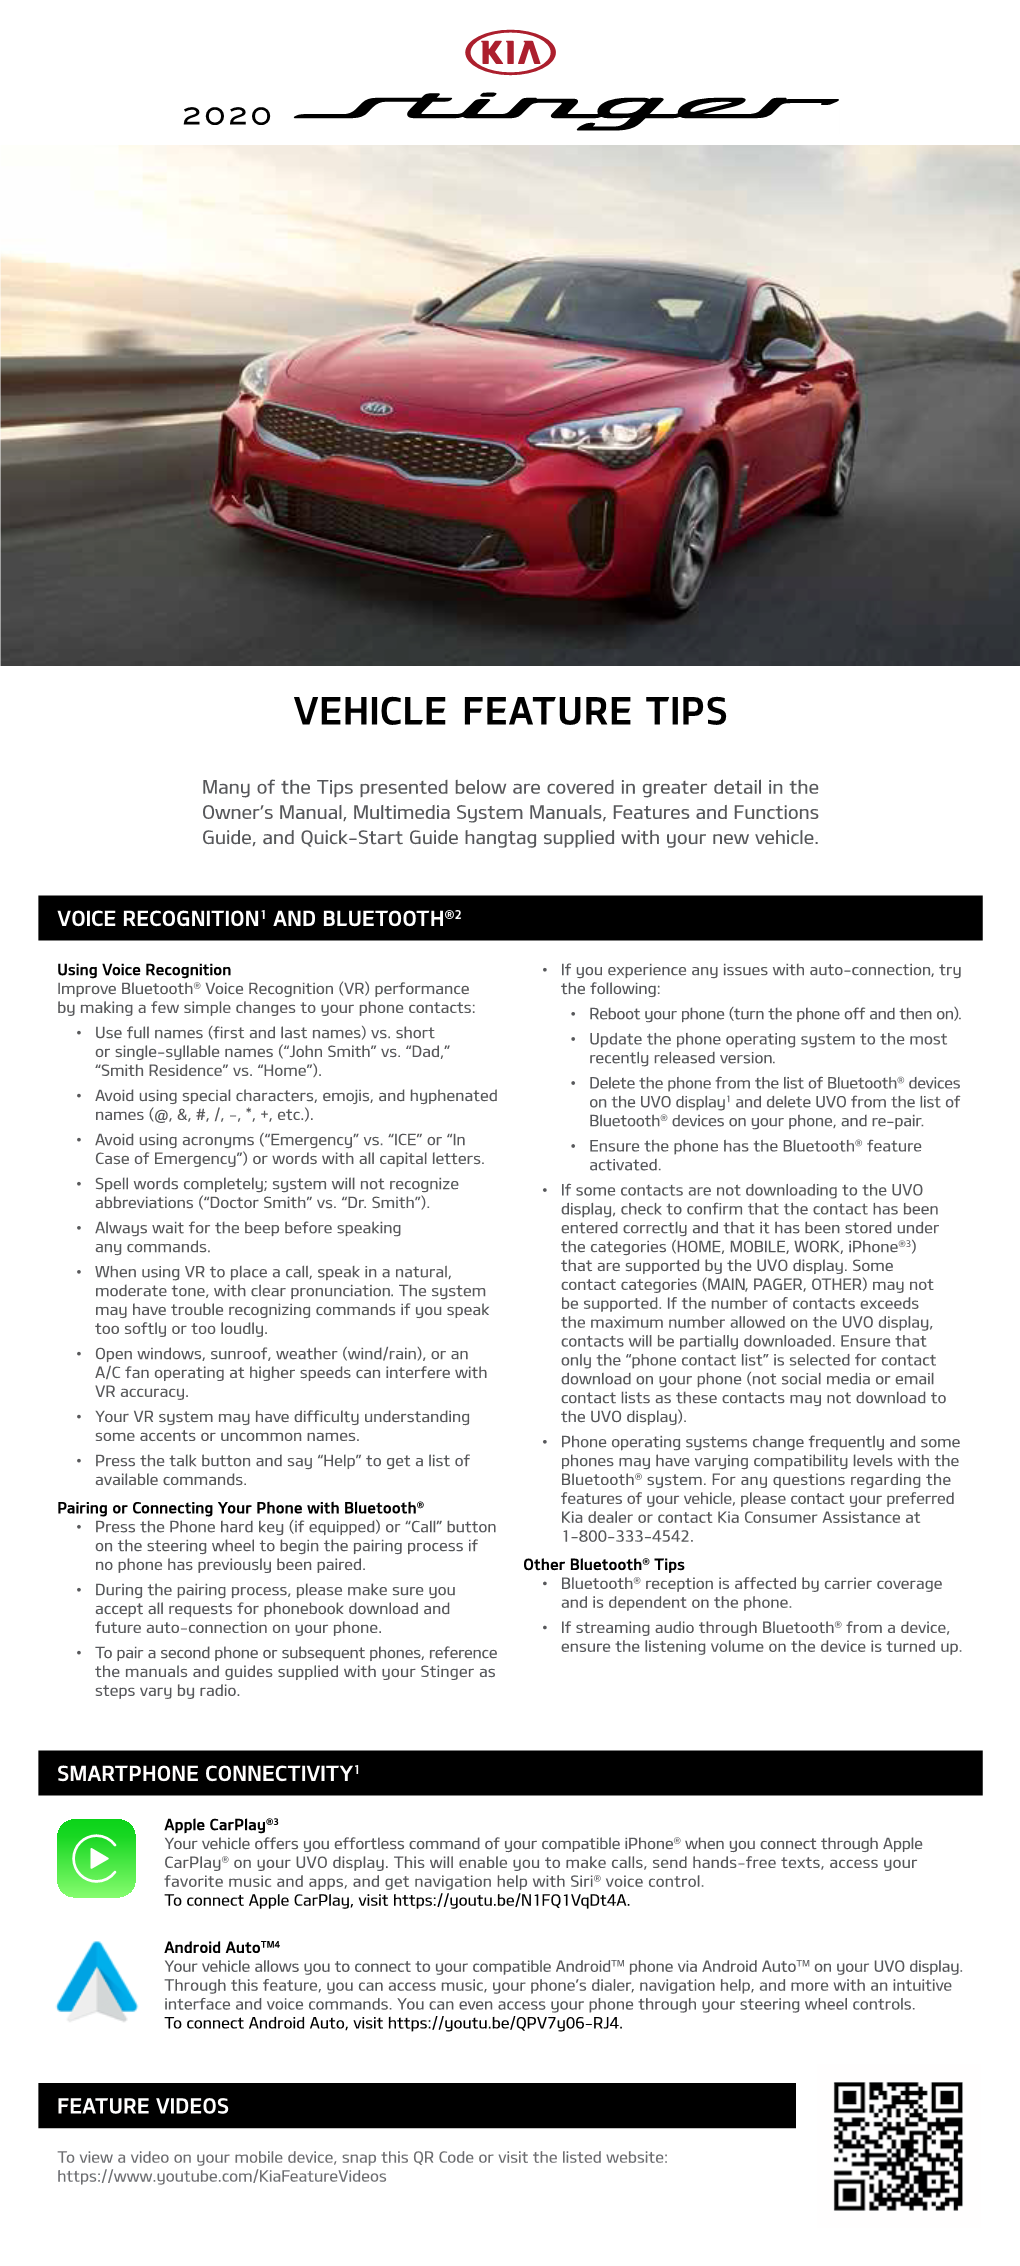 Vehicle Feature Tips